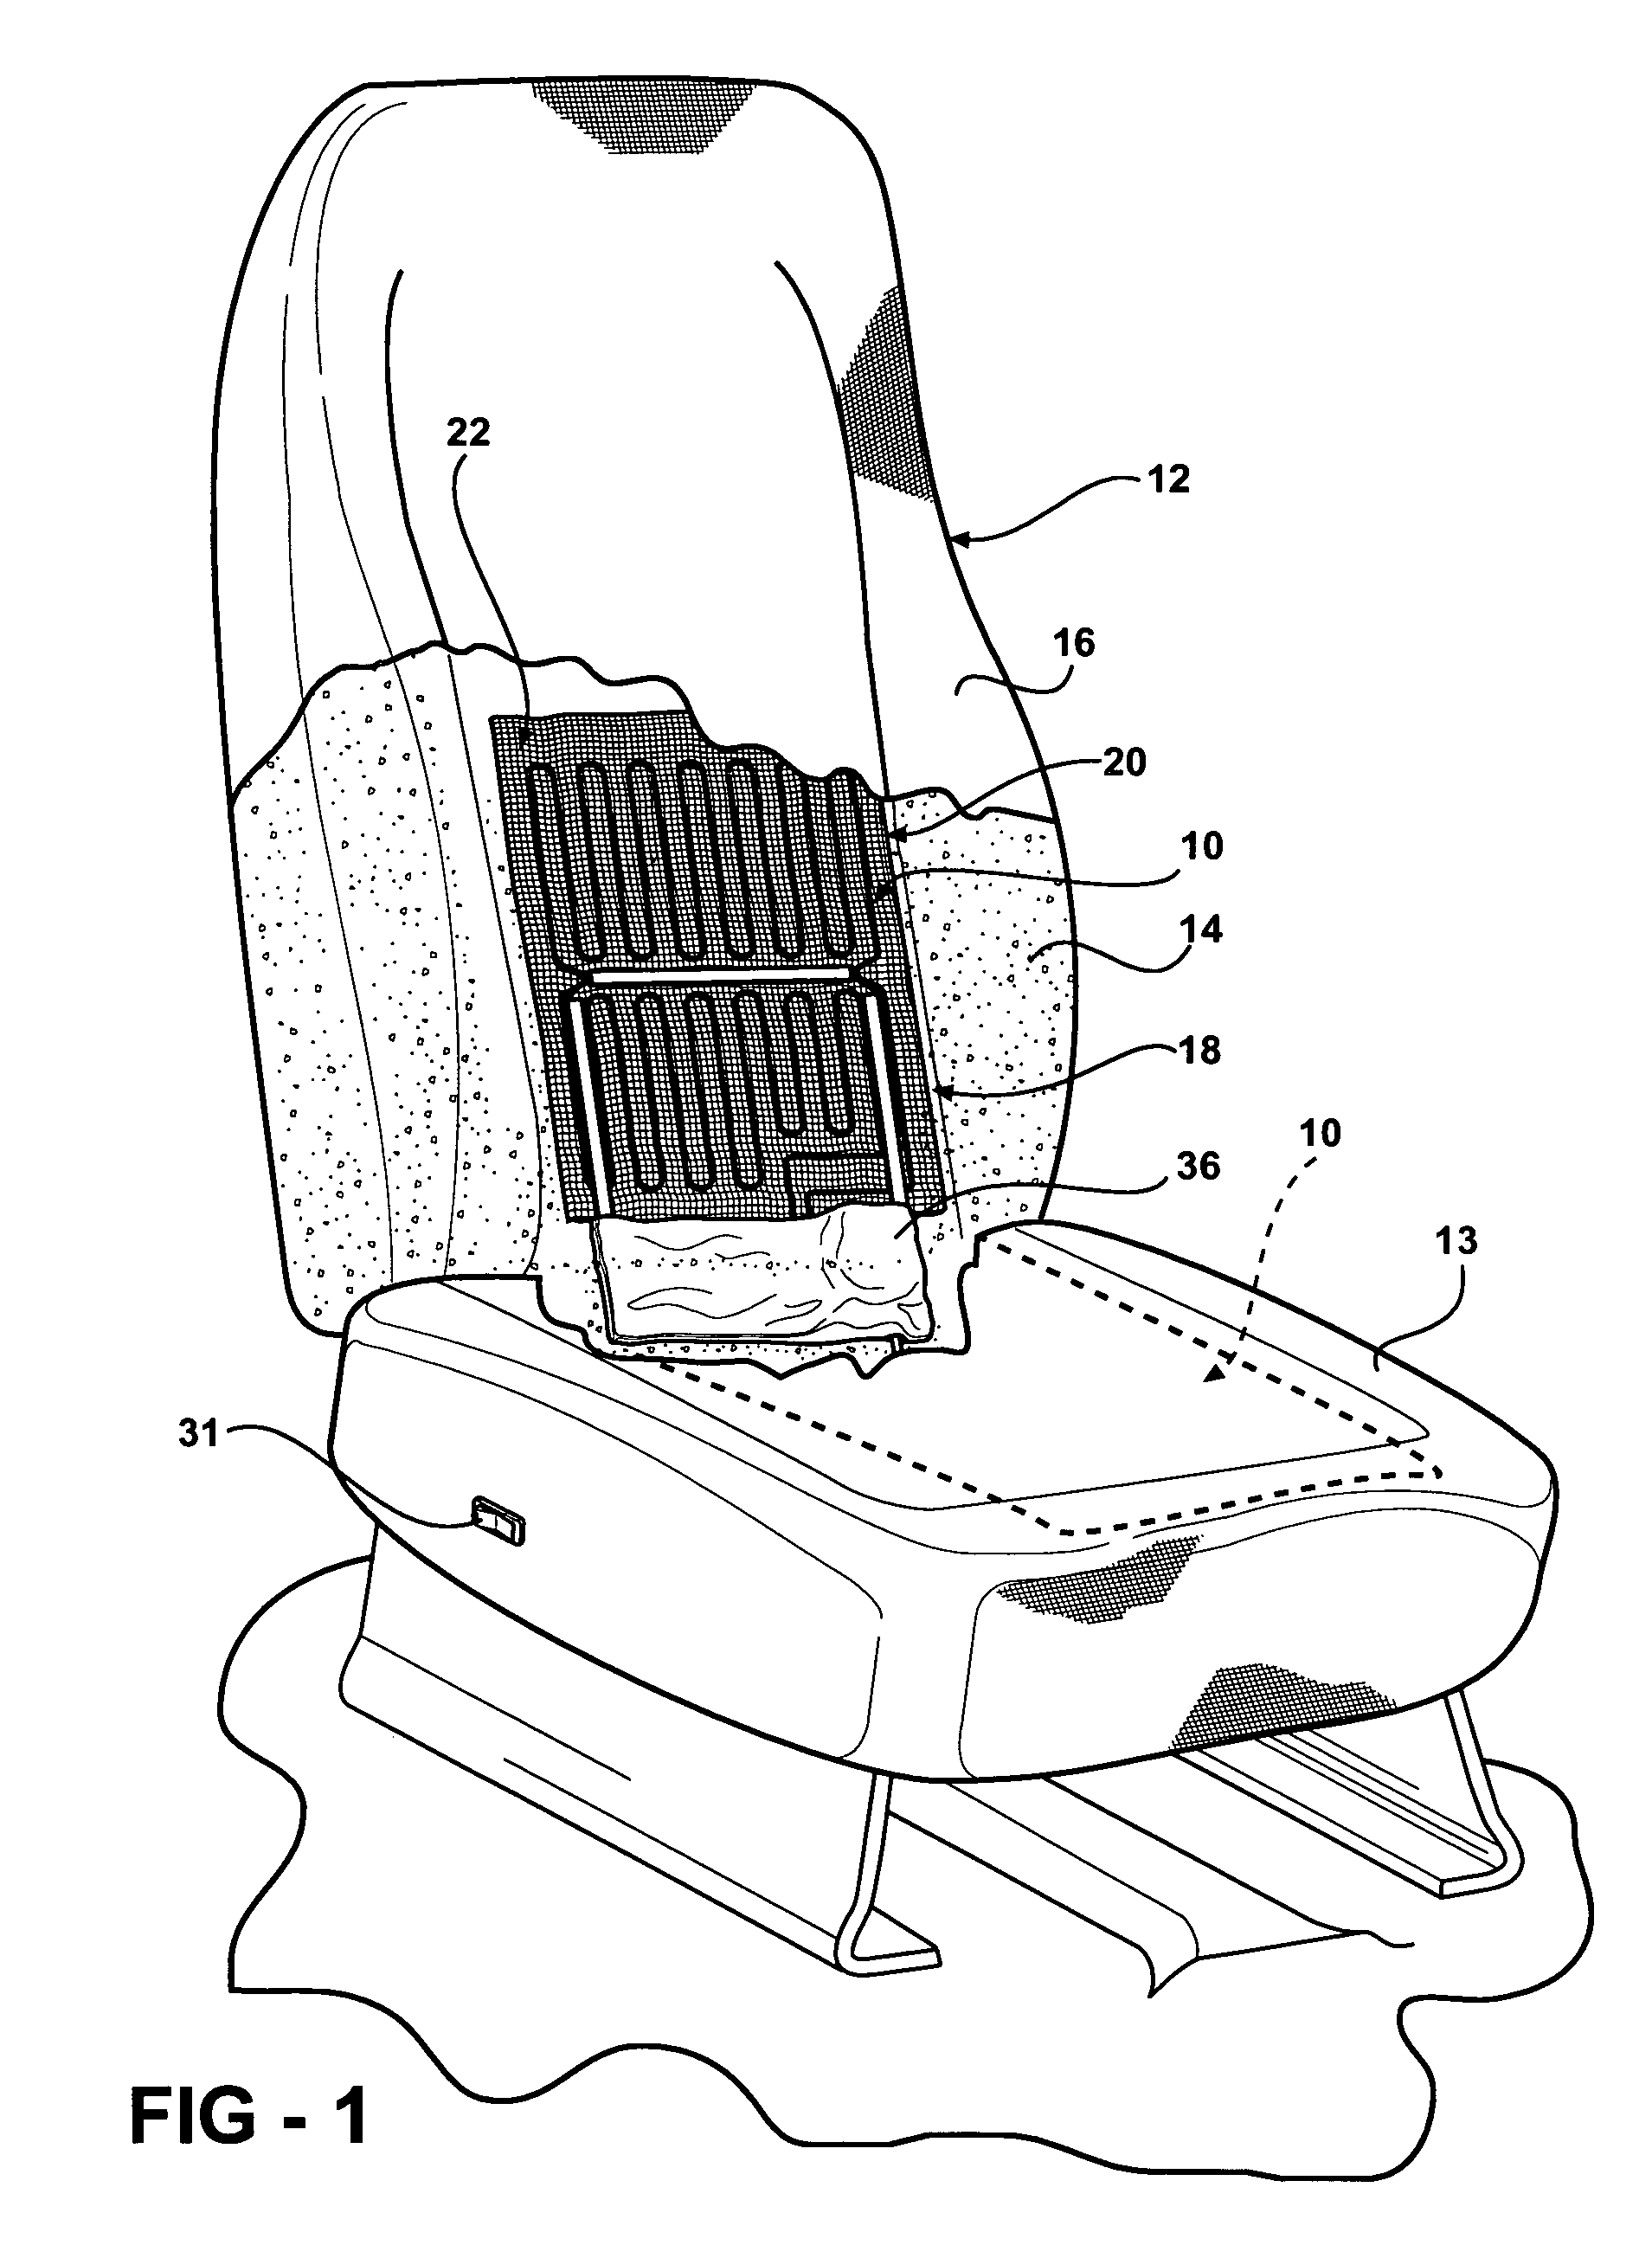 Arrangement and method for providing an air flow within an upholstered seat